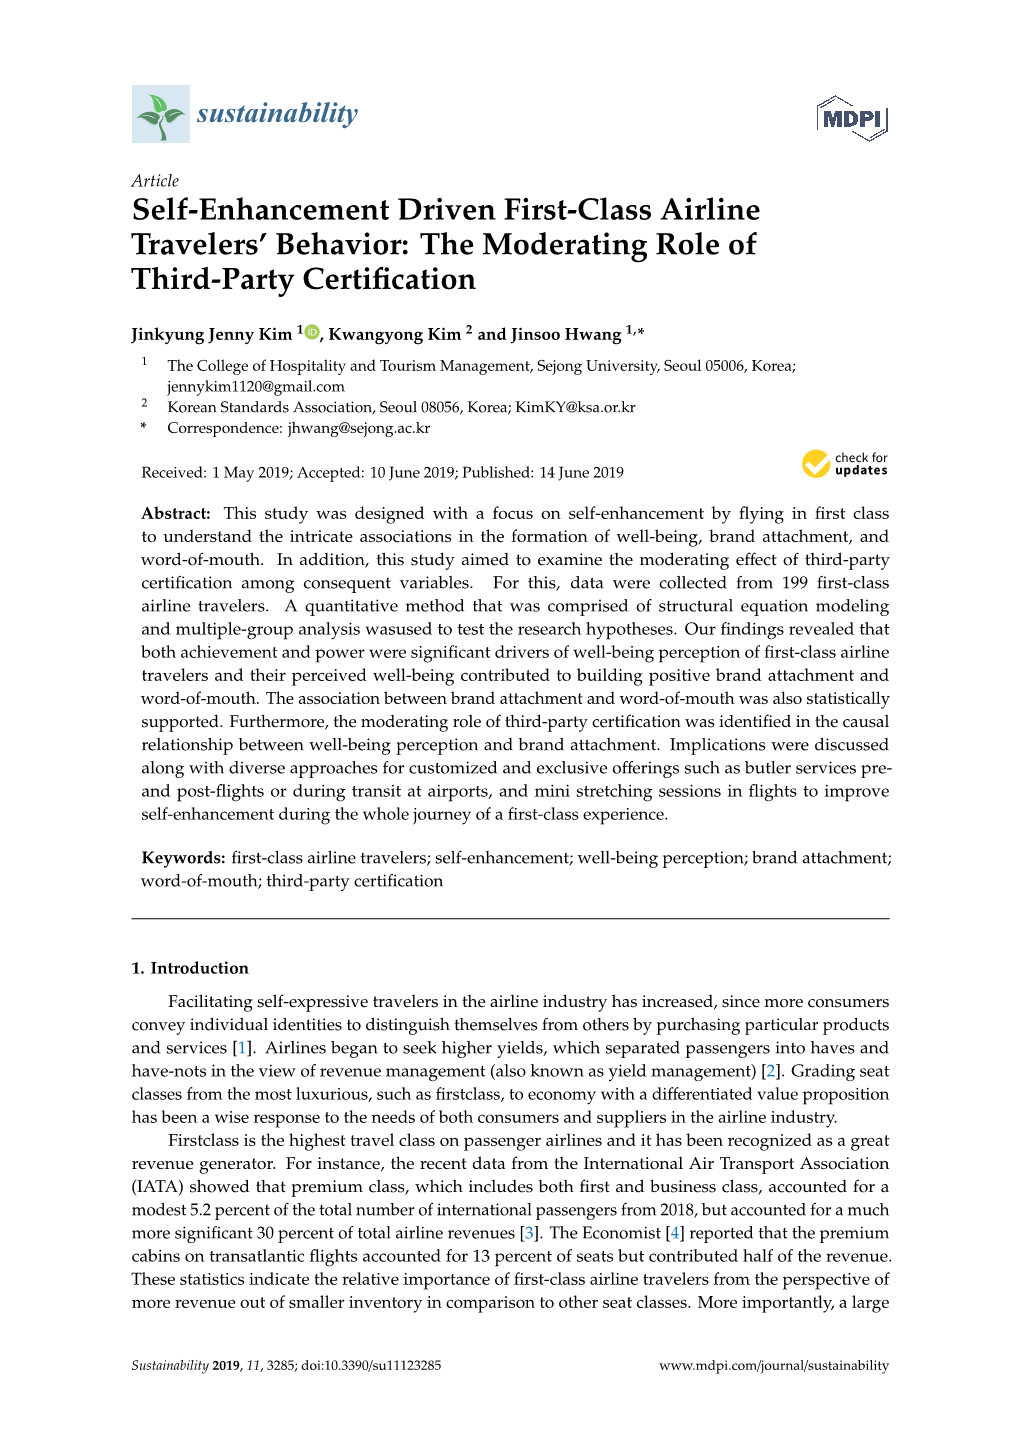 Self-Enhancement Driven First-Class Airline Travelers’ Behavior: the Moderating Role of Third-Party Certiﬁcation